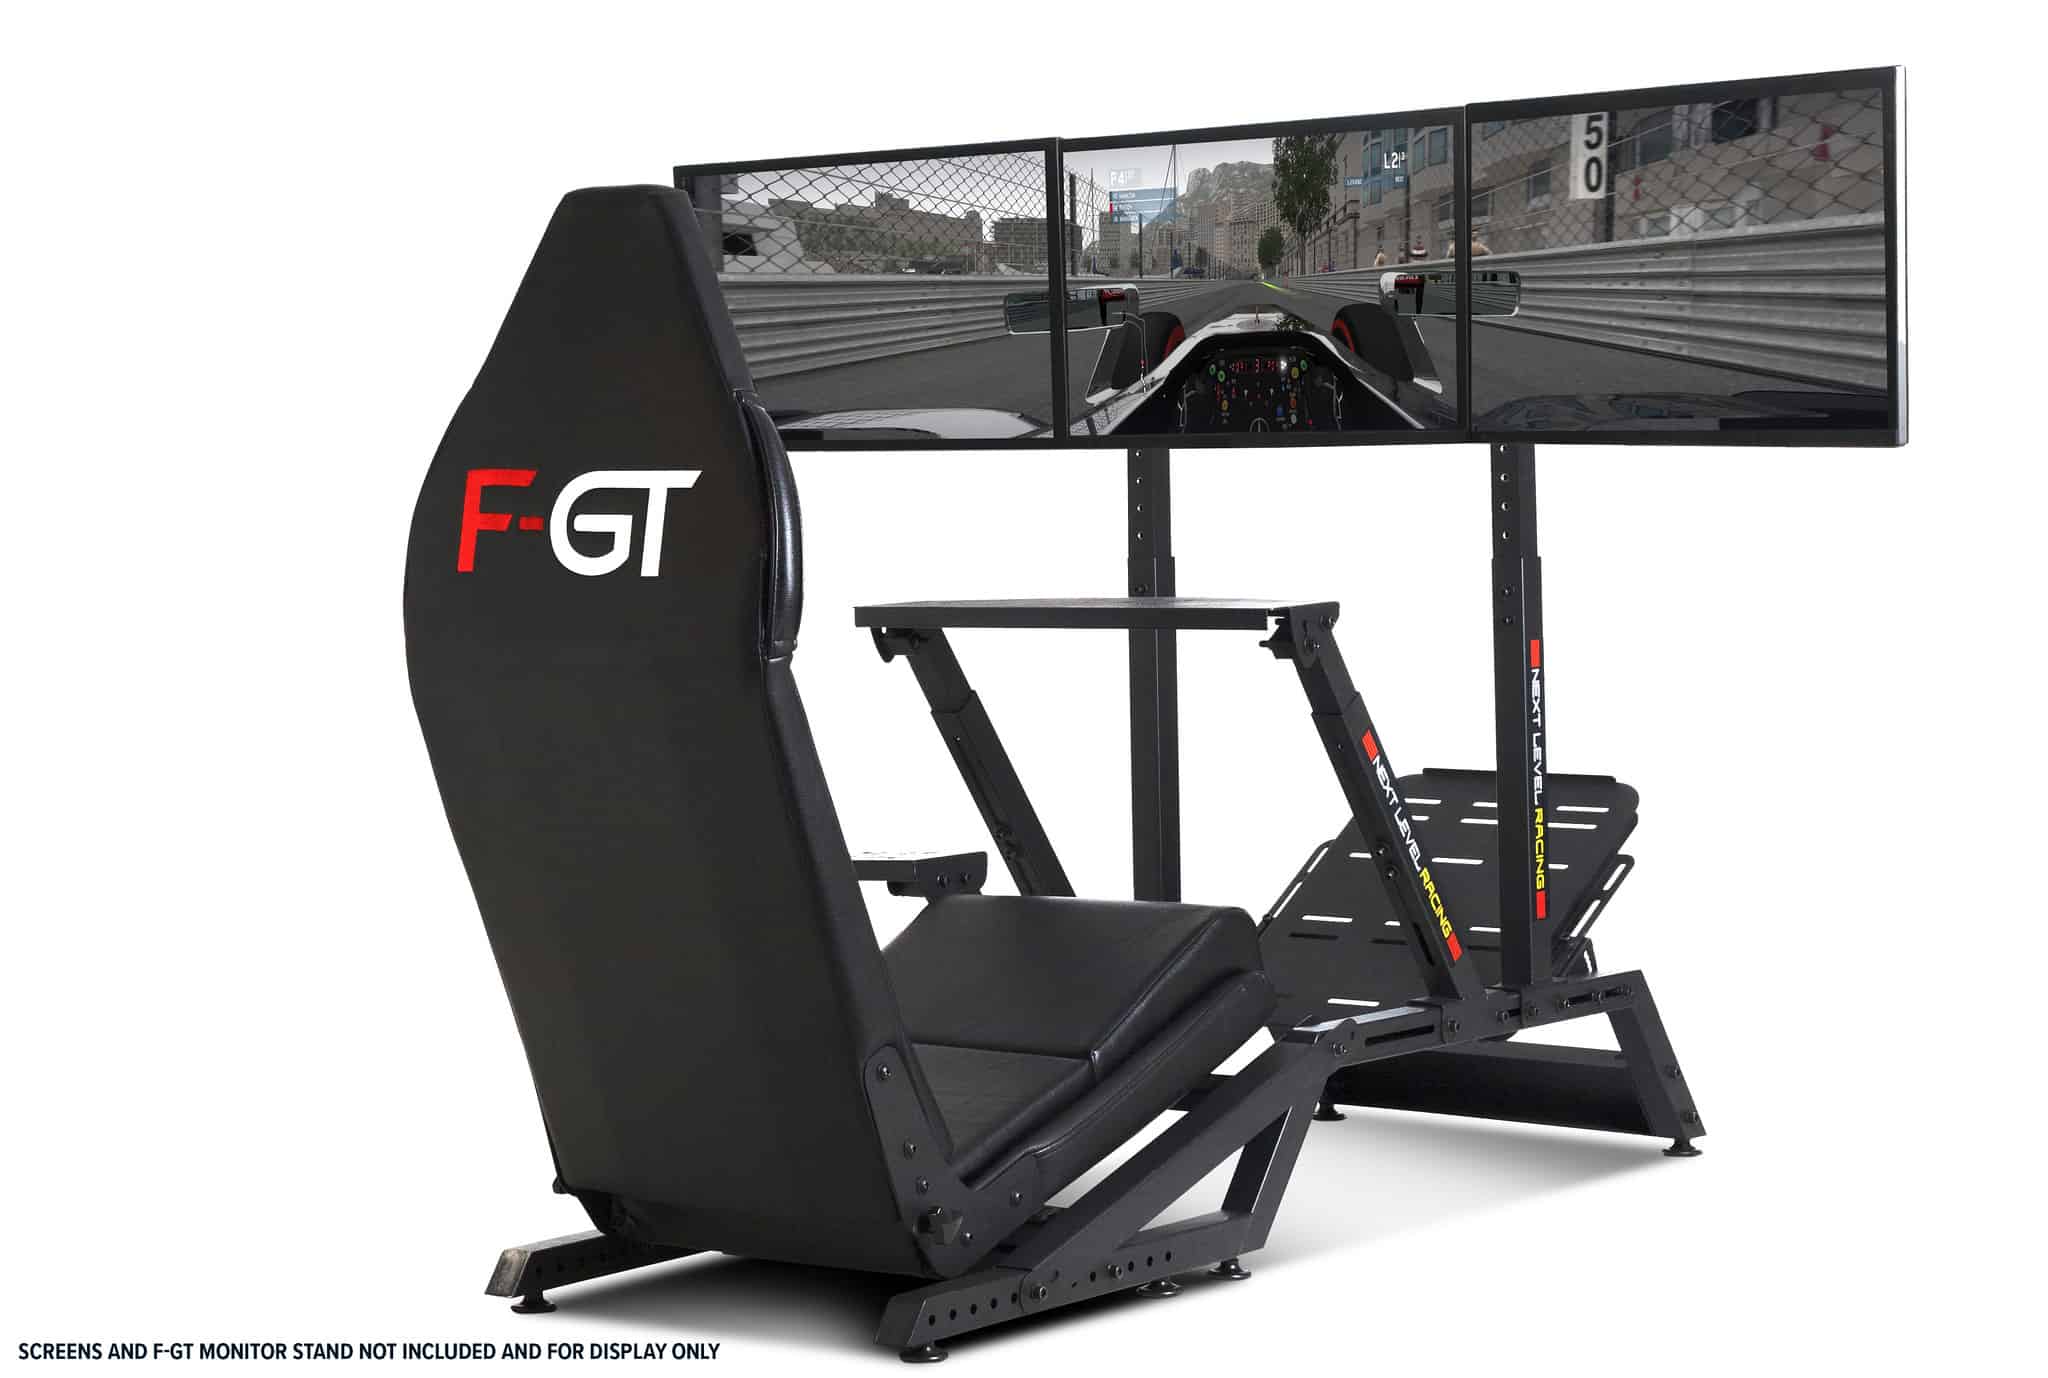 A Comprehensive Review of the Next Level Racing F-GT Simulator Cockpit